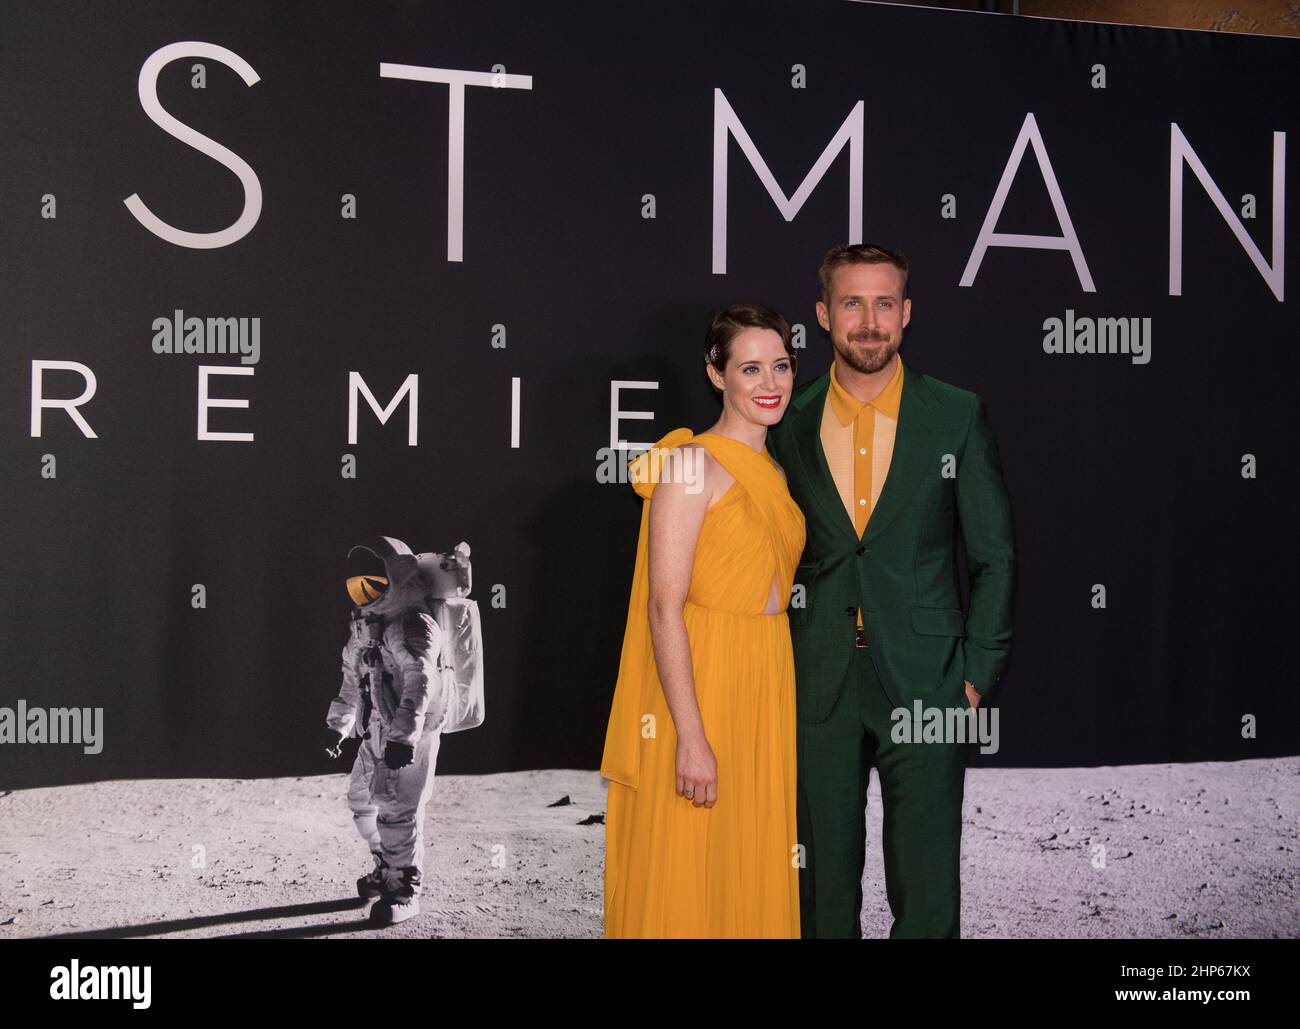 American actress Claire Foy, left, and American actor Ryan Gosling, right, arrive on the red carpet for the premiere of the film 'First Man' at the Smithsonian National Air and Space Museum Thursday, Oct. 4, 2018 in Washington. Stock Photo